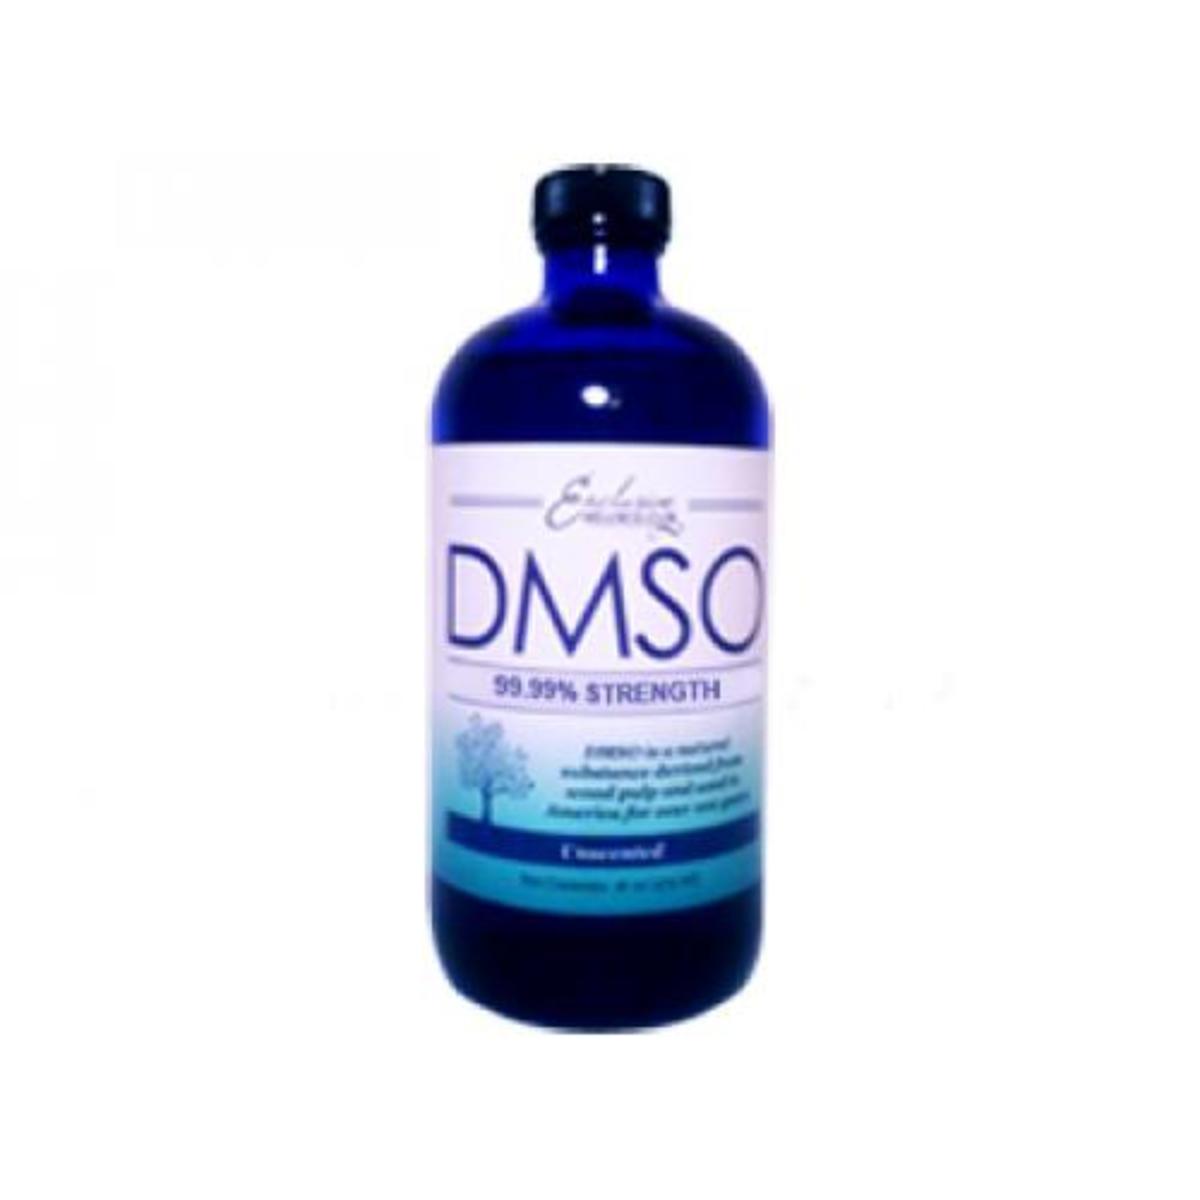 DMSO can be bought for individual use from Exclusive Wellness Club online. It's a fantastic site, with good prices for DMSO